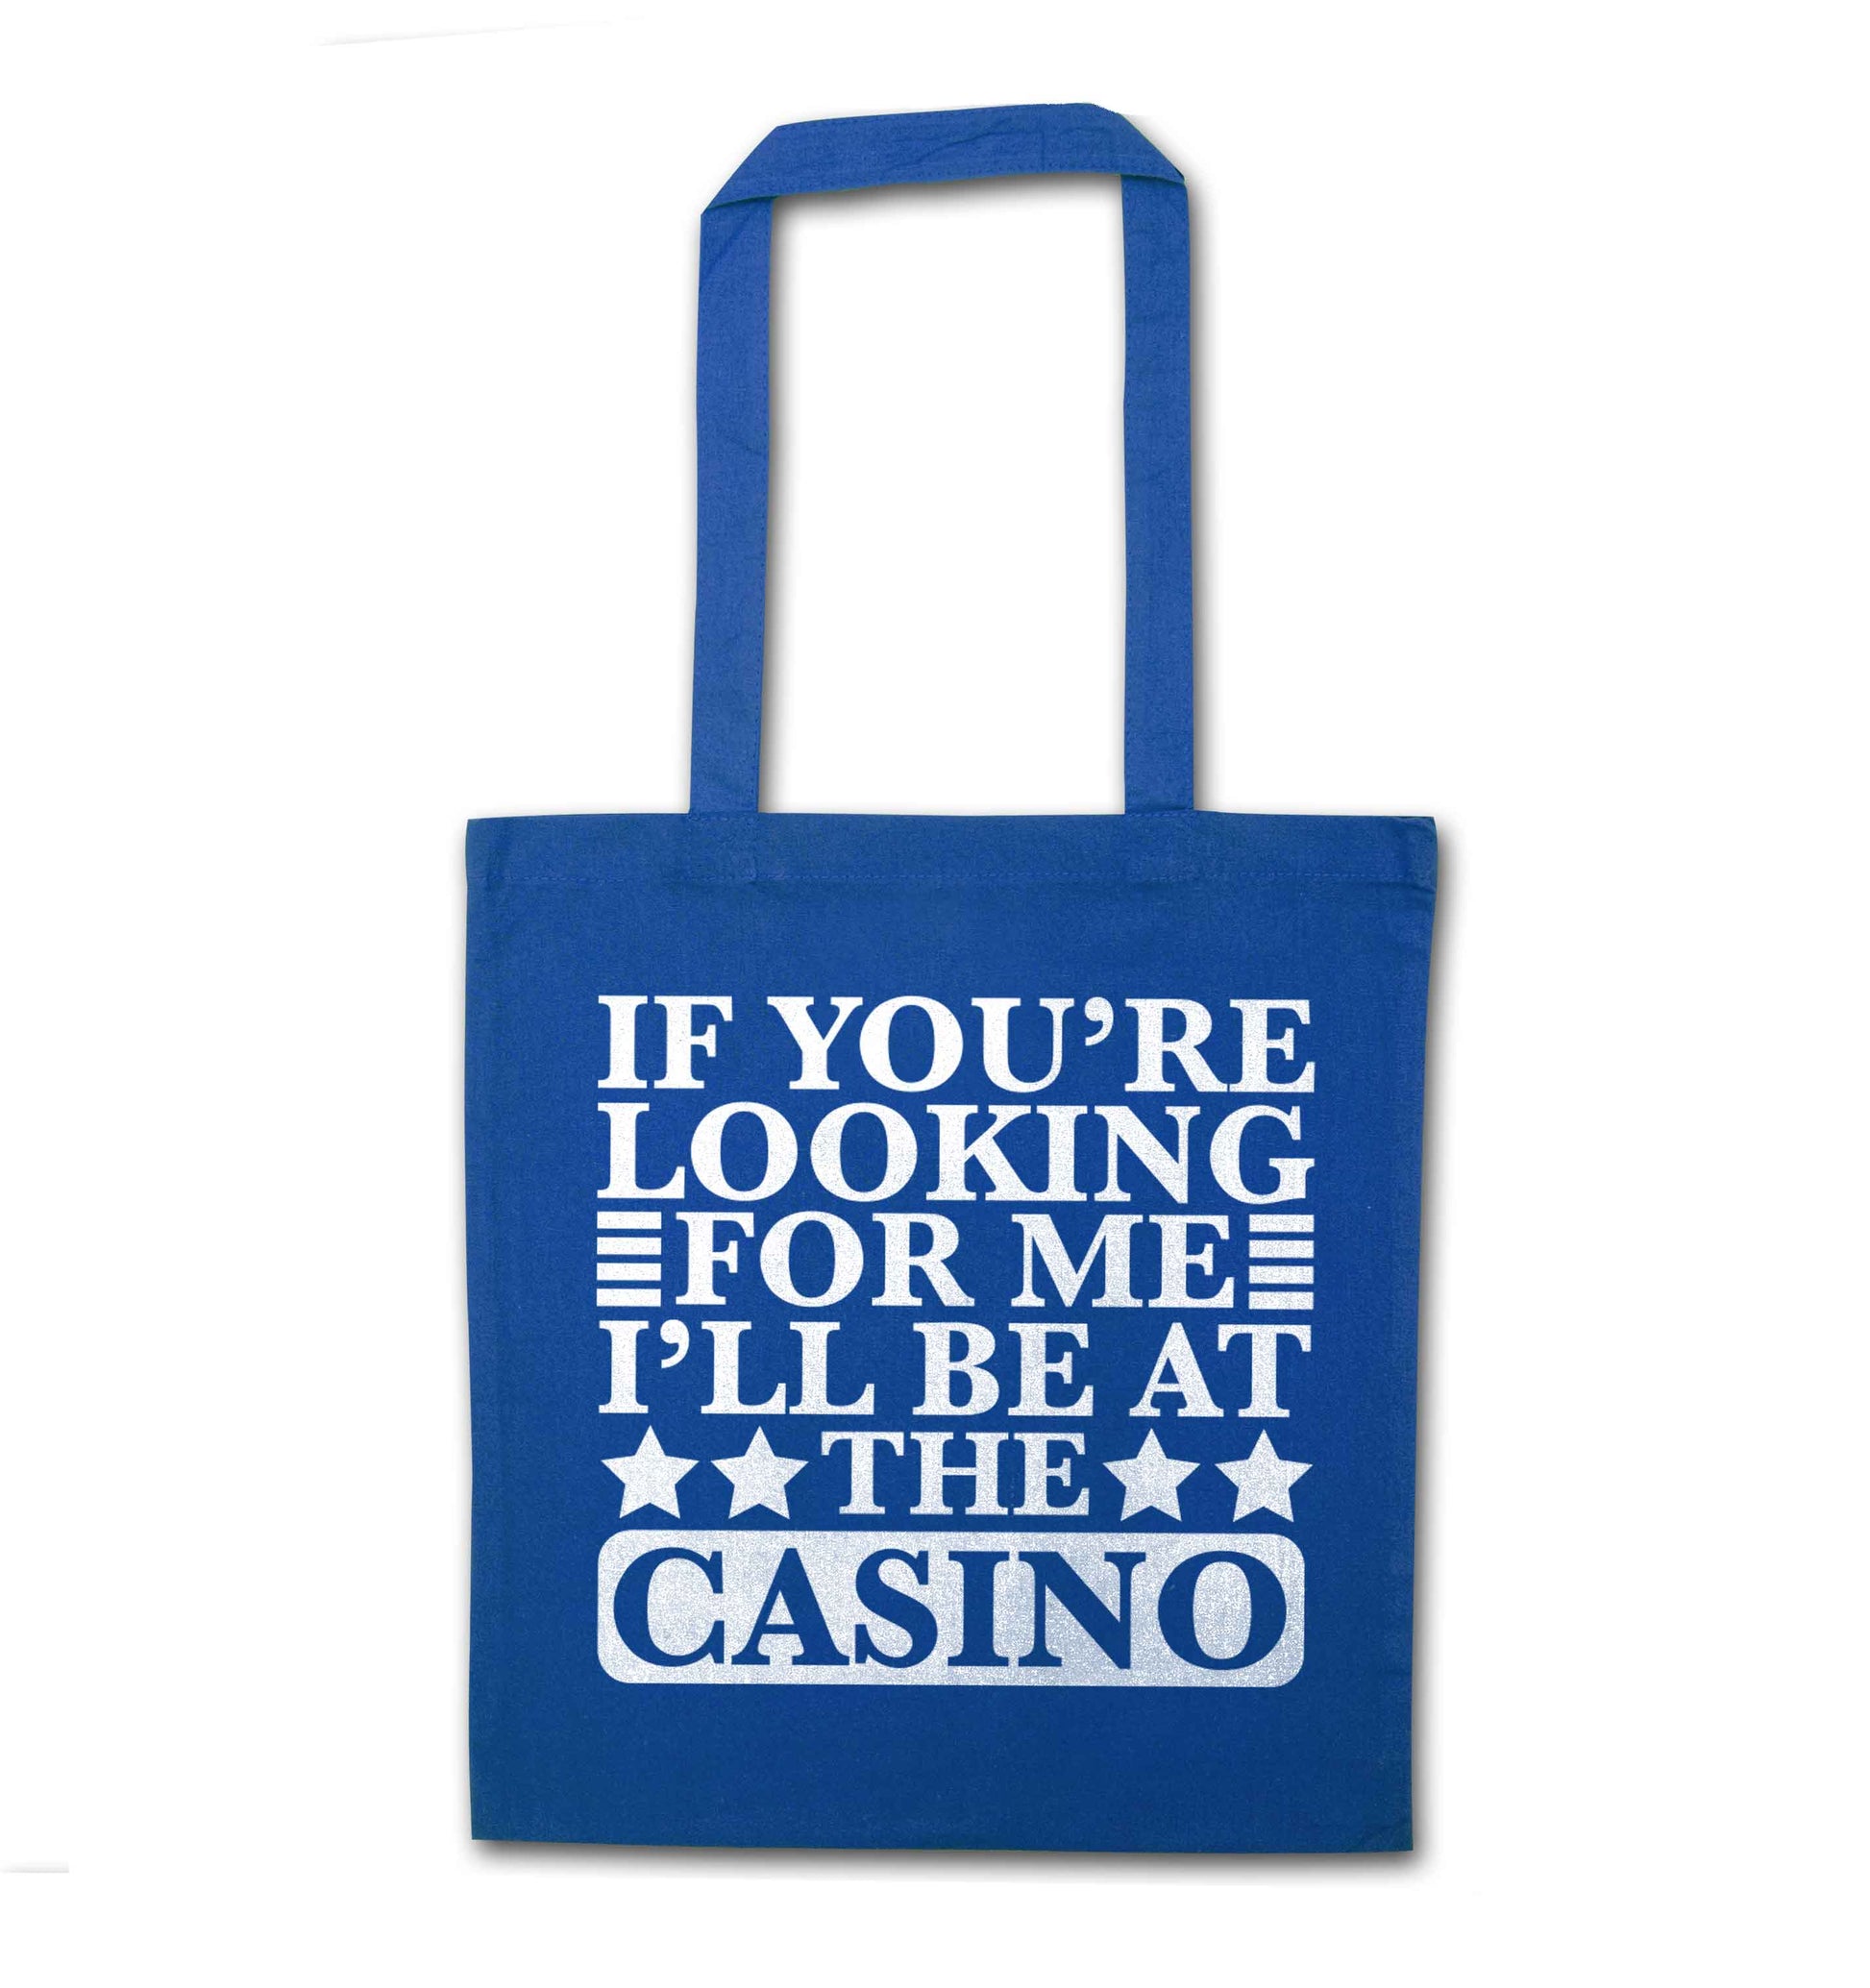 If you're looking for me I'll be at the casino blue tote bag